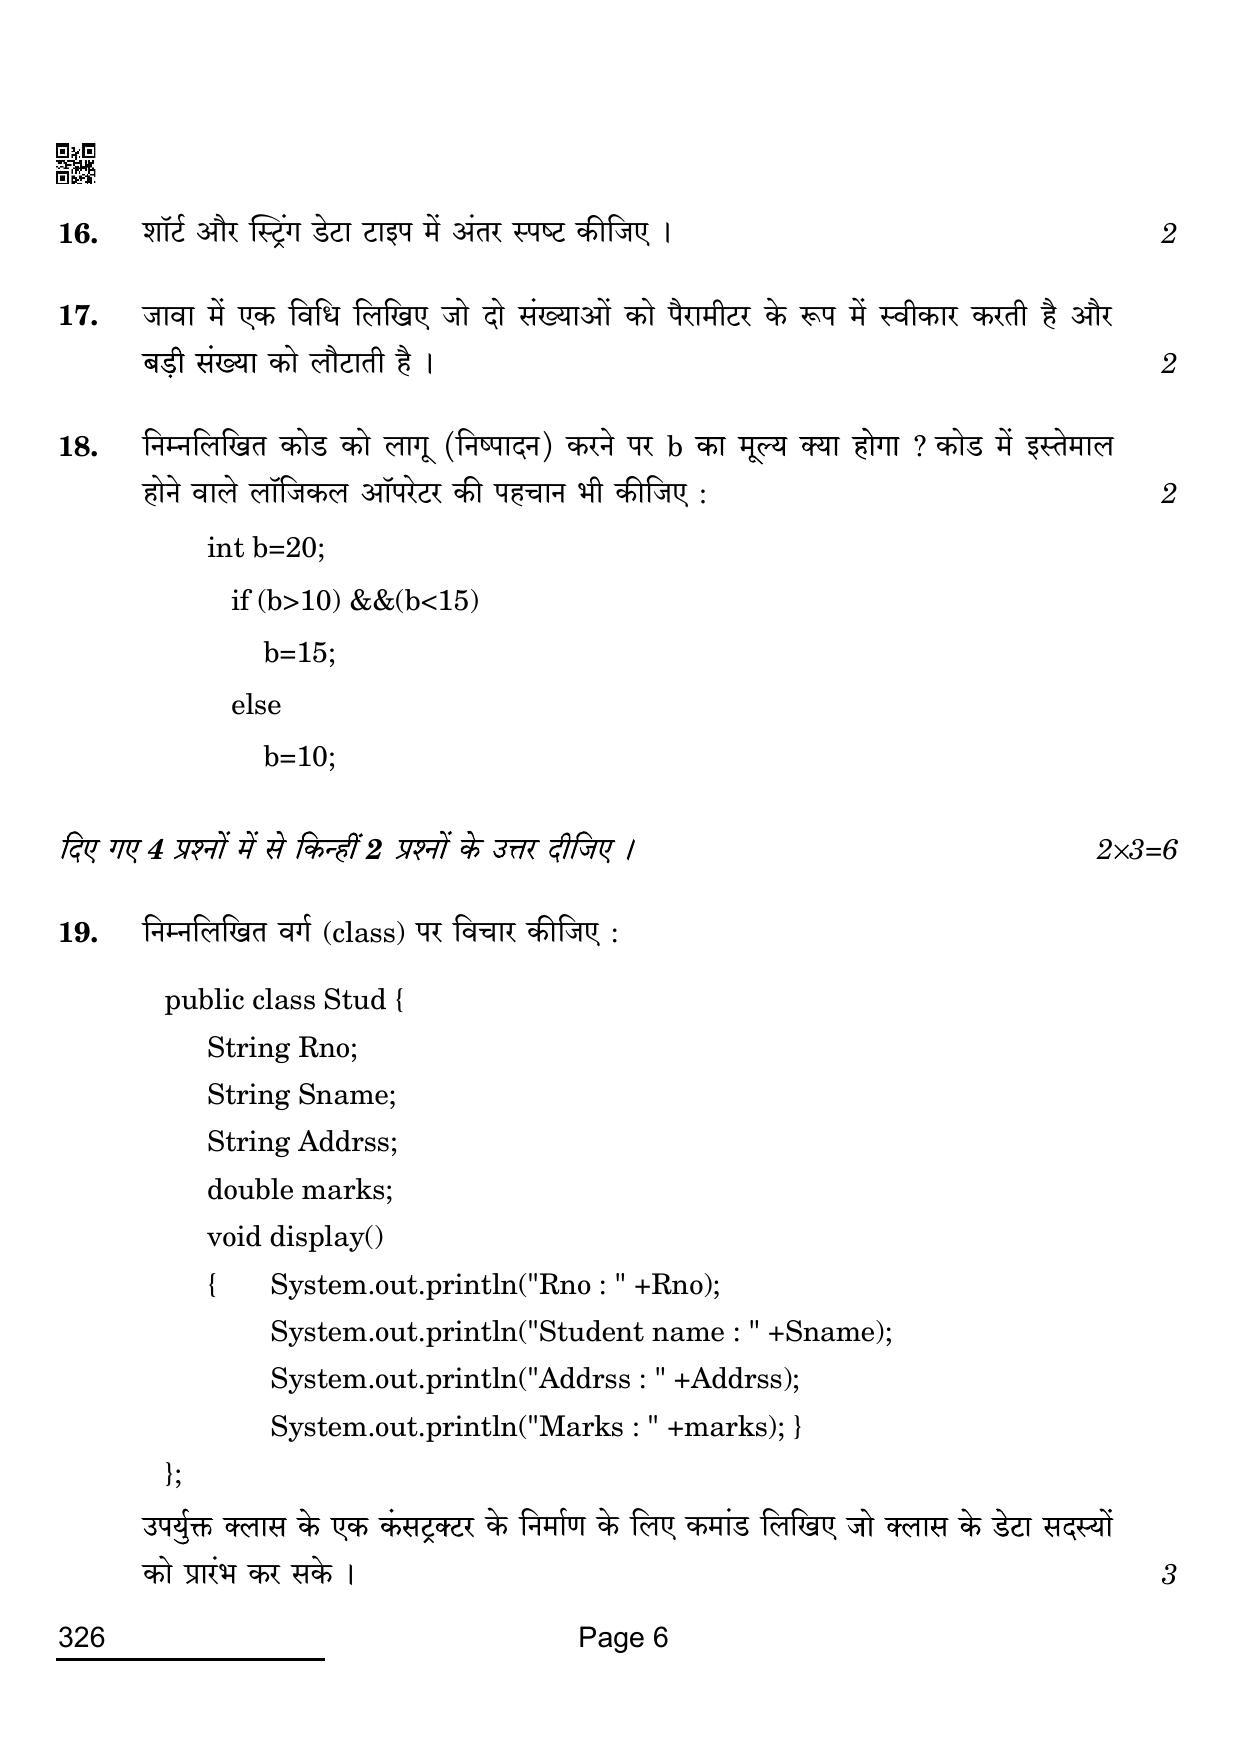 CBSE Class 12 326_Information Technology 2022 Question Paper - Page 6